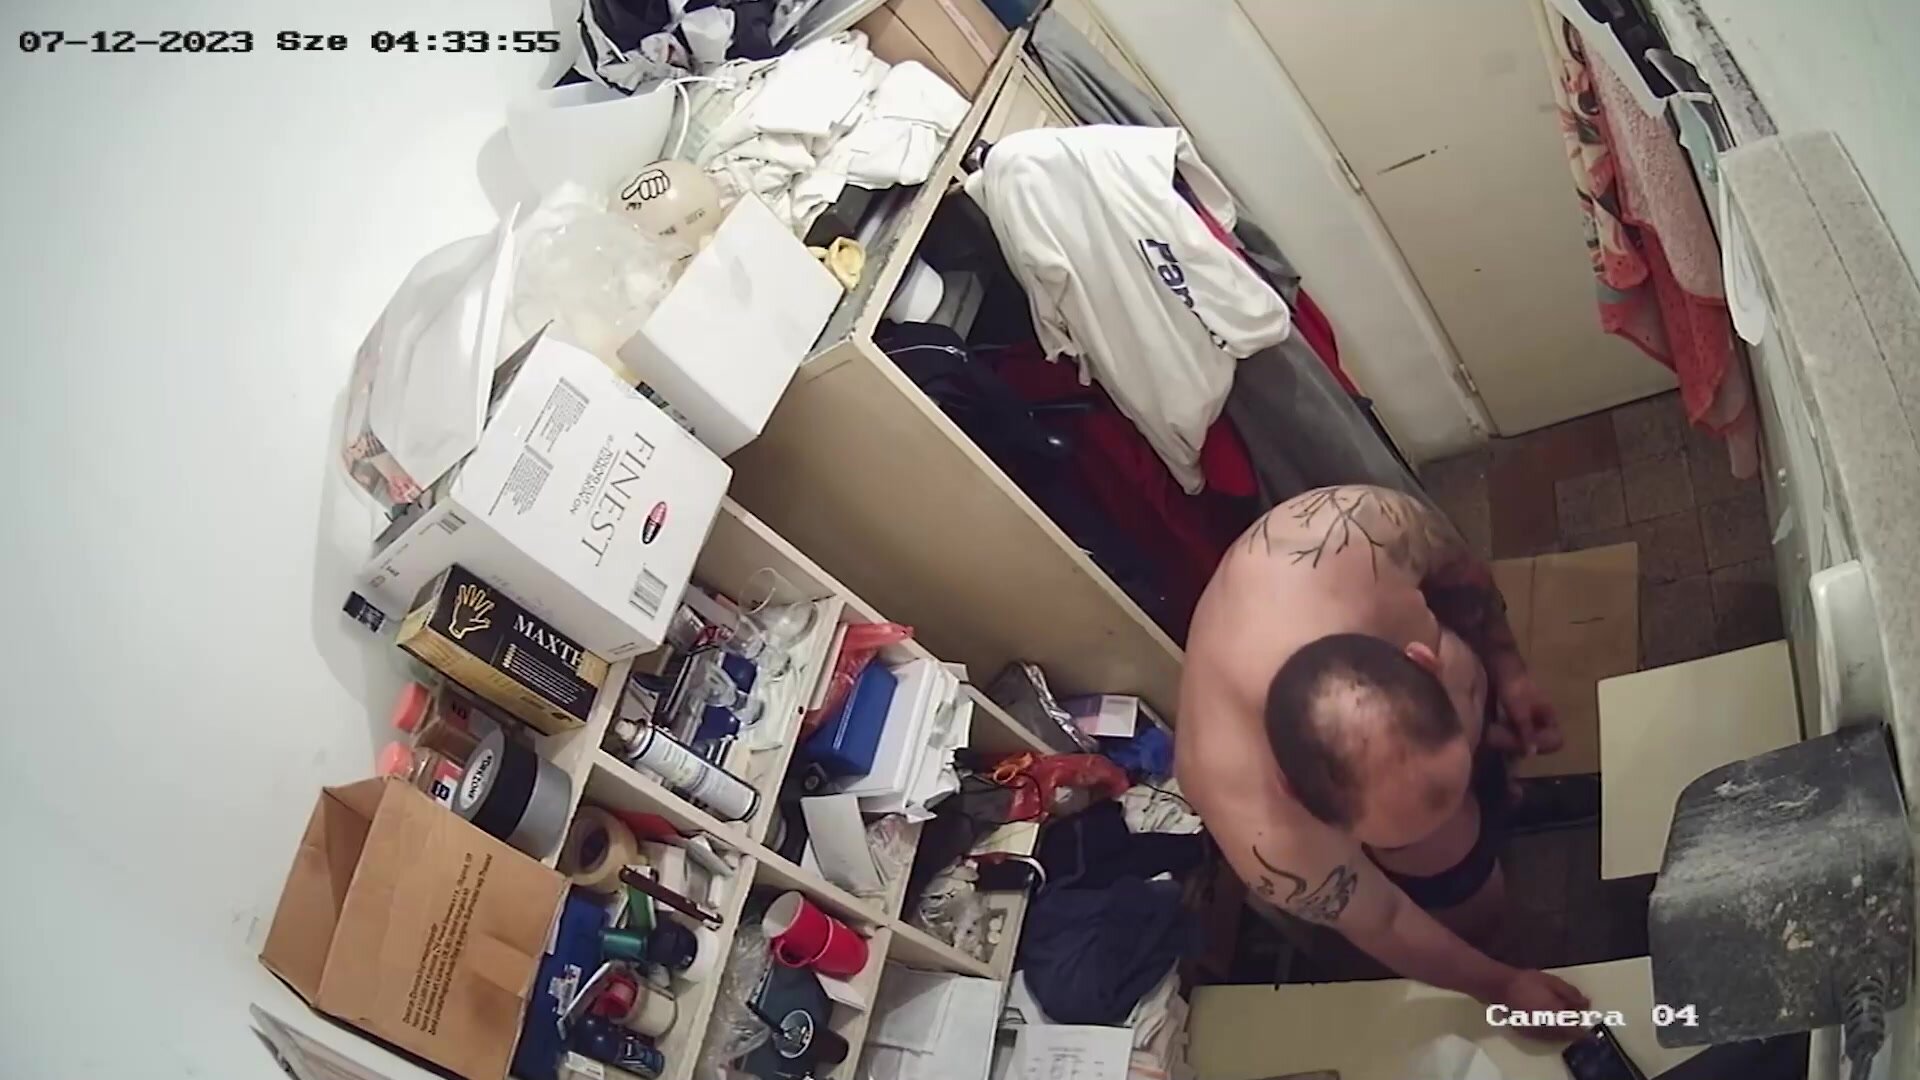 Spy - Hungarian Dad jerking off at work on ipcam